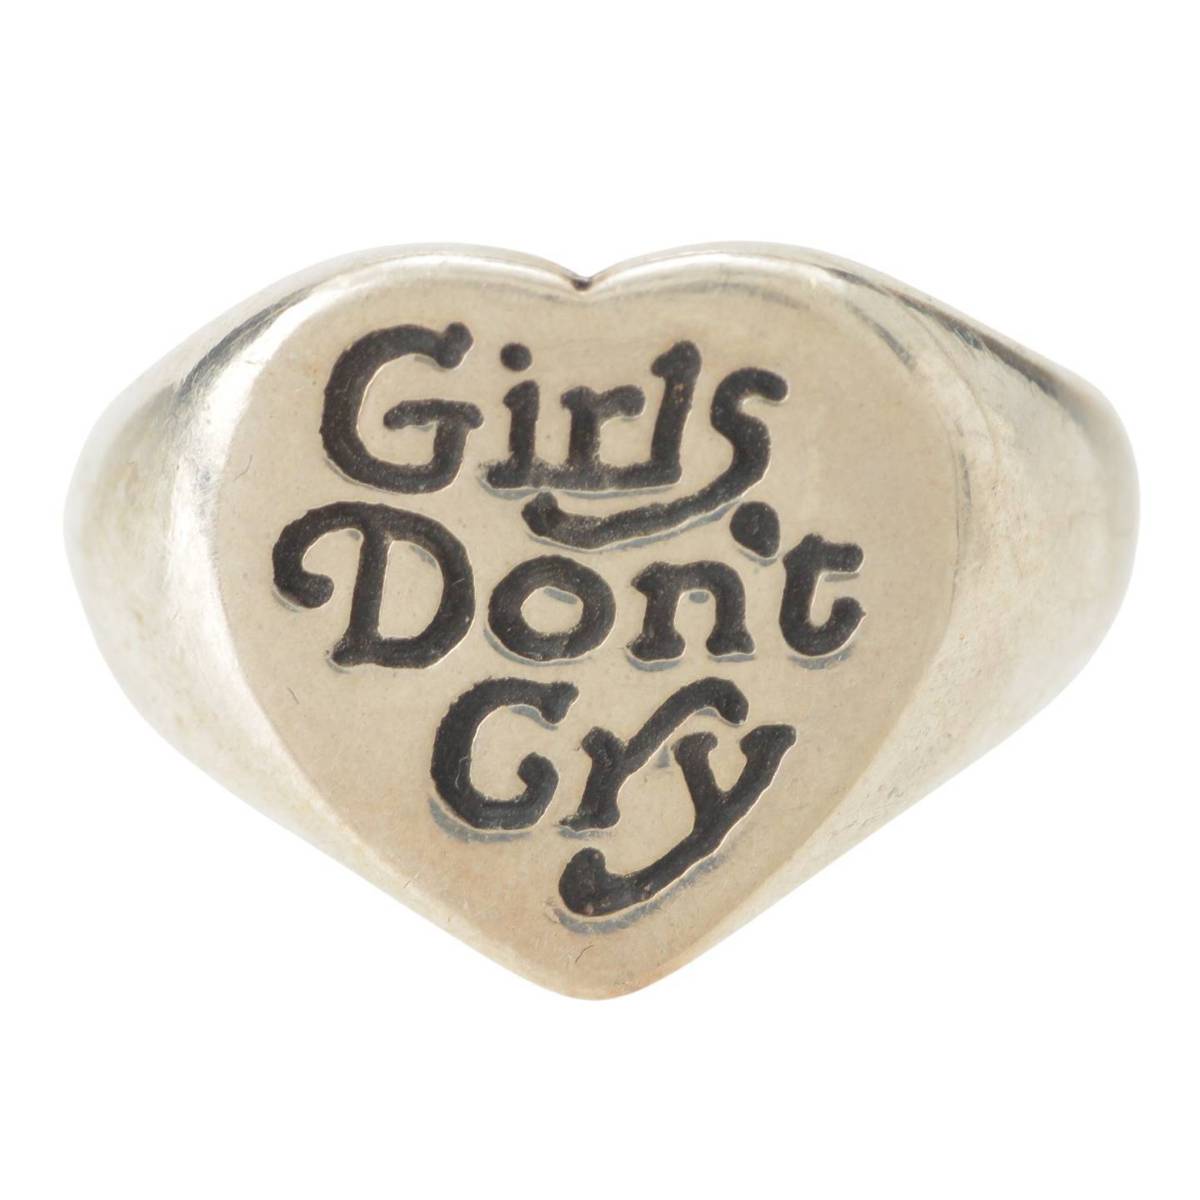 Girls don’t cry Bill wall leather リングwastedyouth